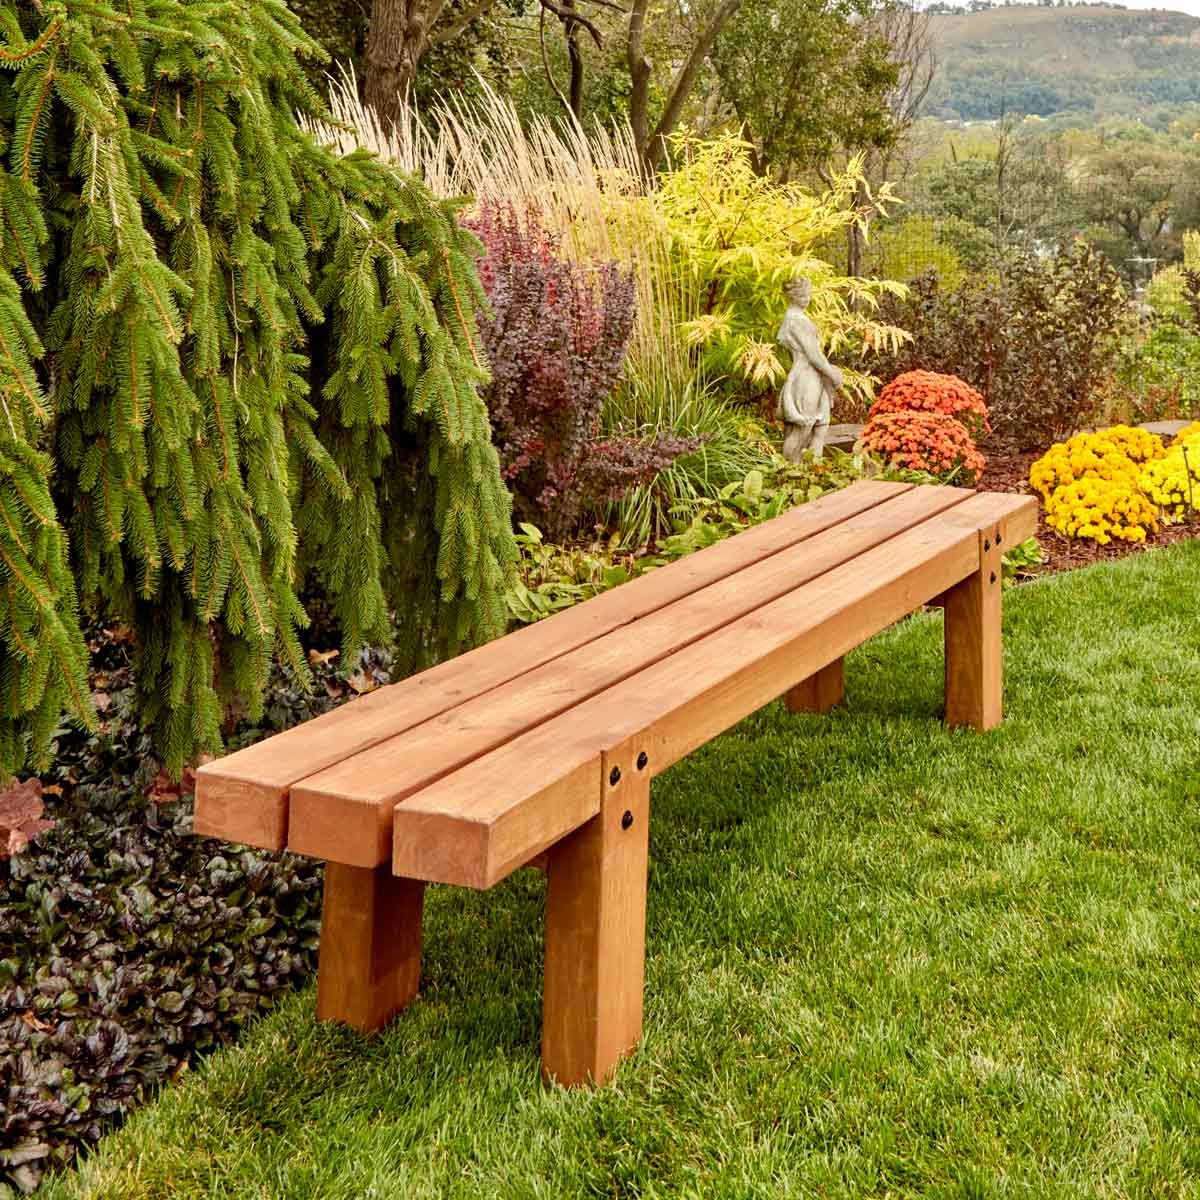 How to Make Simple Timber Bench The Family Handyman